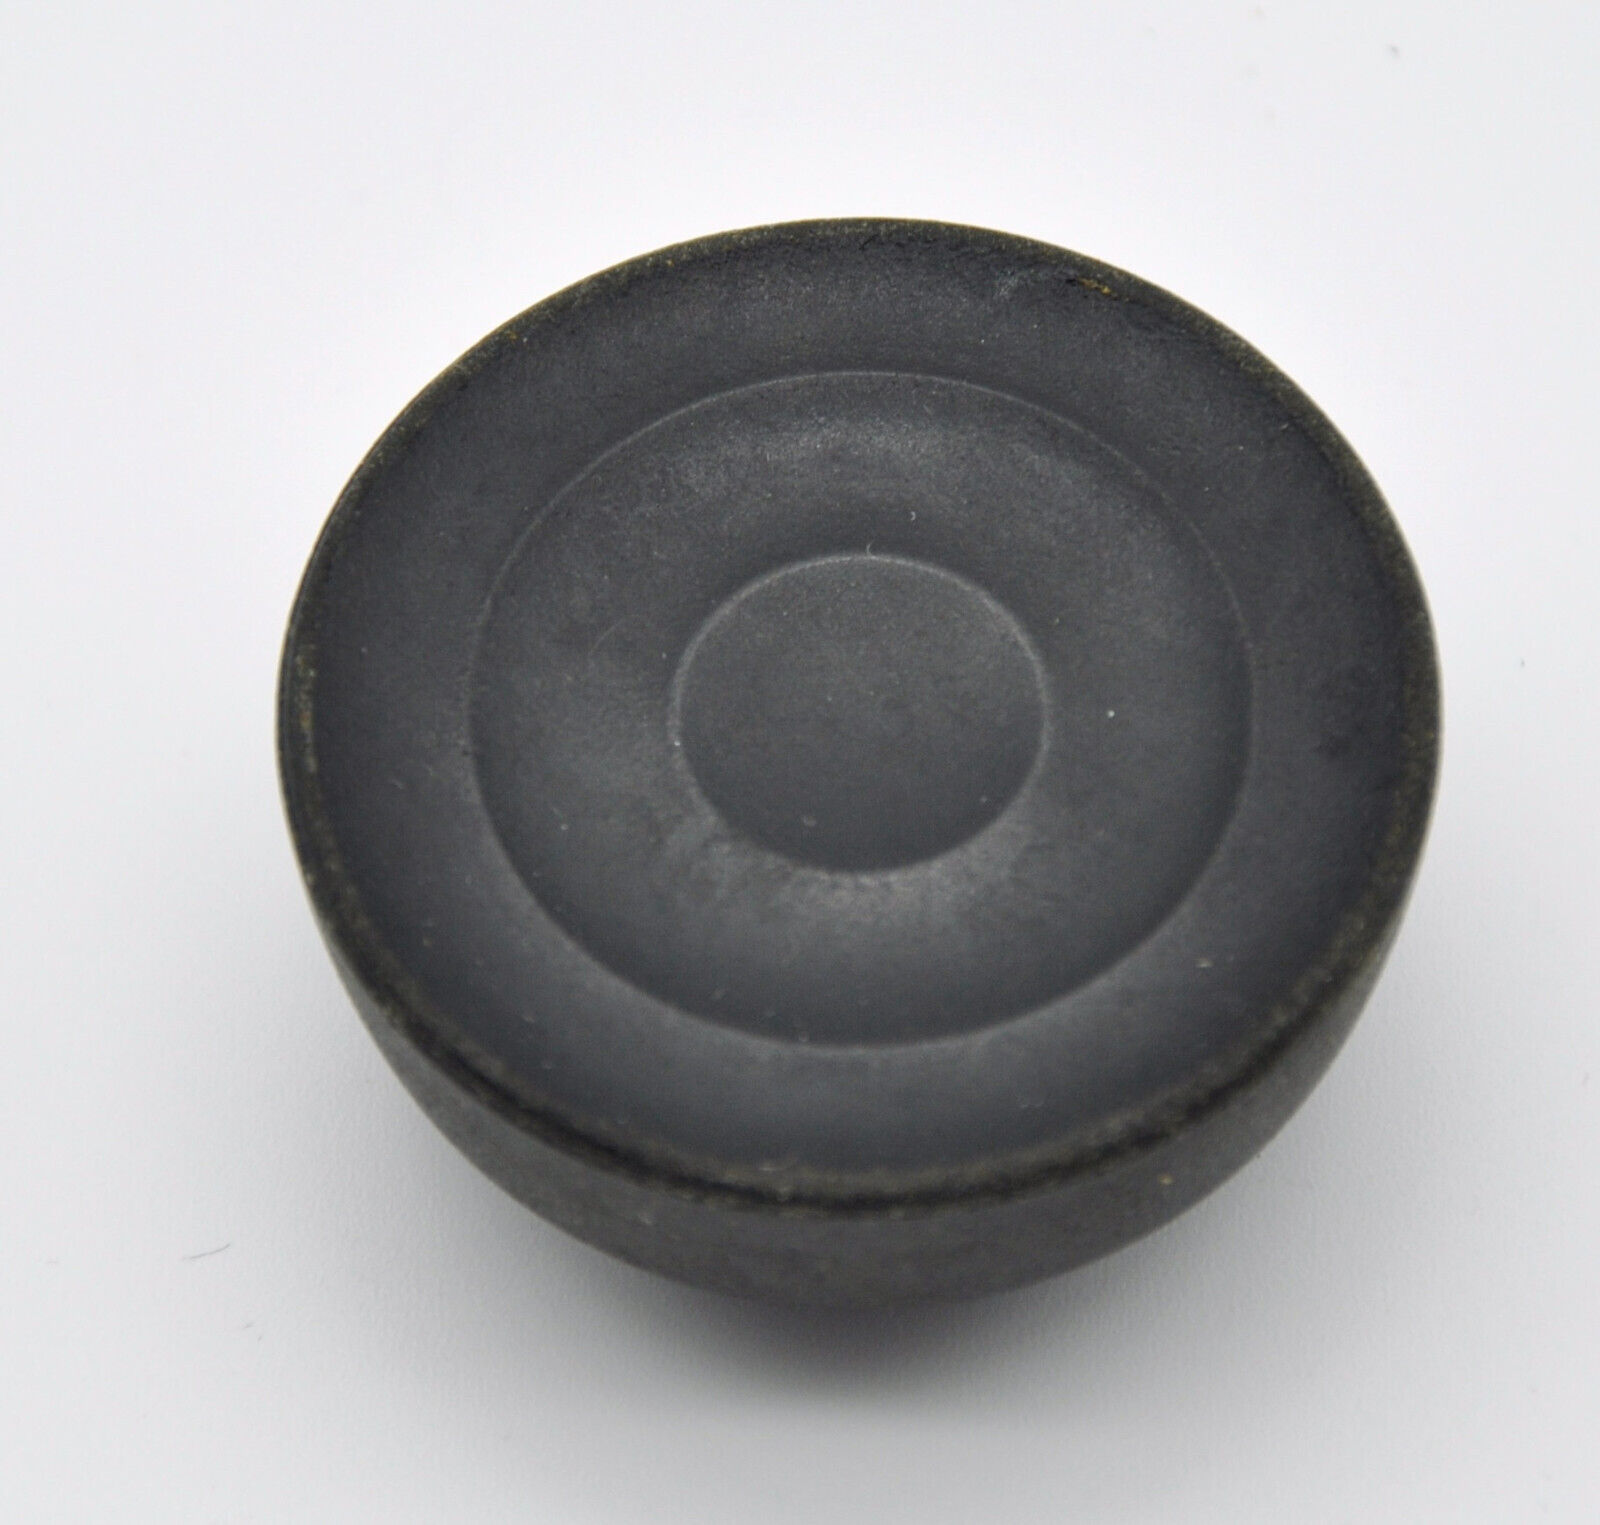 Replacement Lid Knob for Revere Ware Lids (single knob)